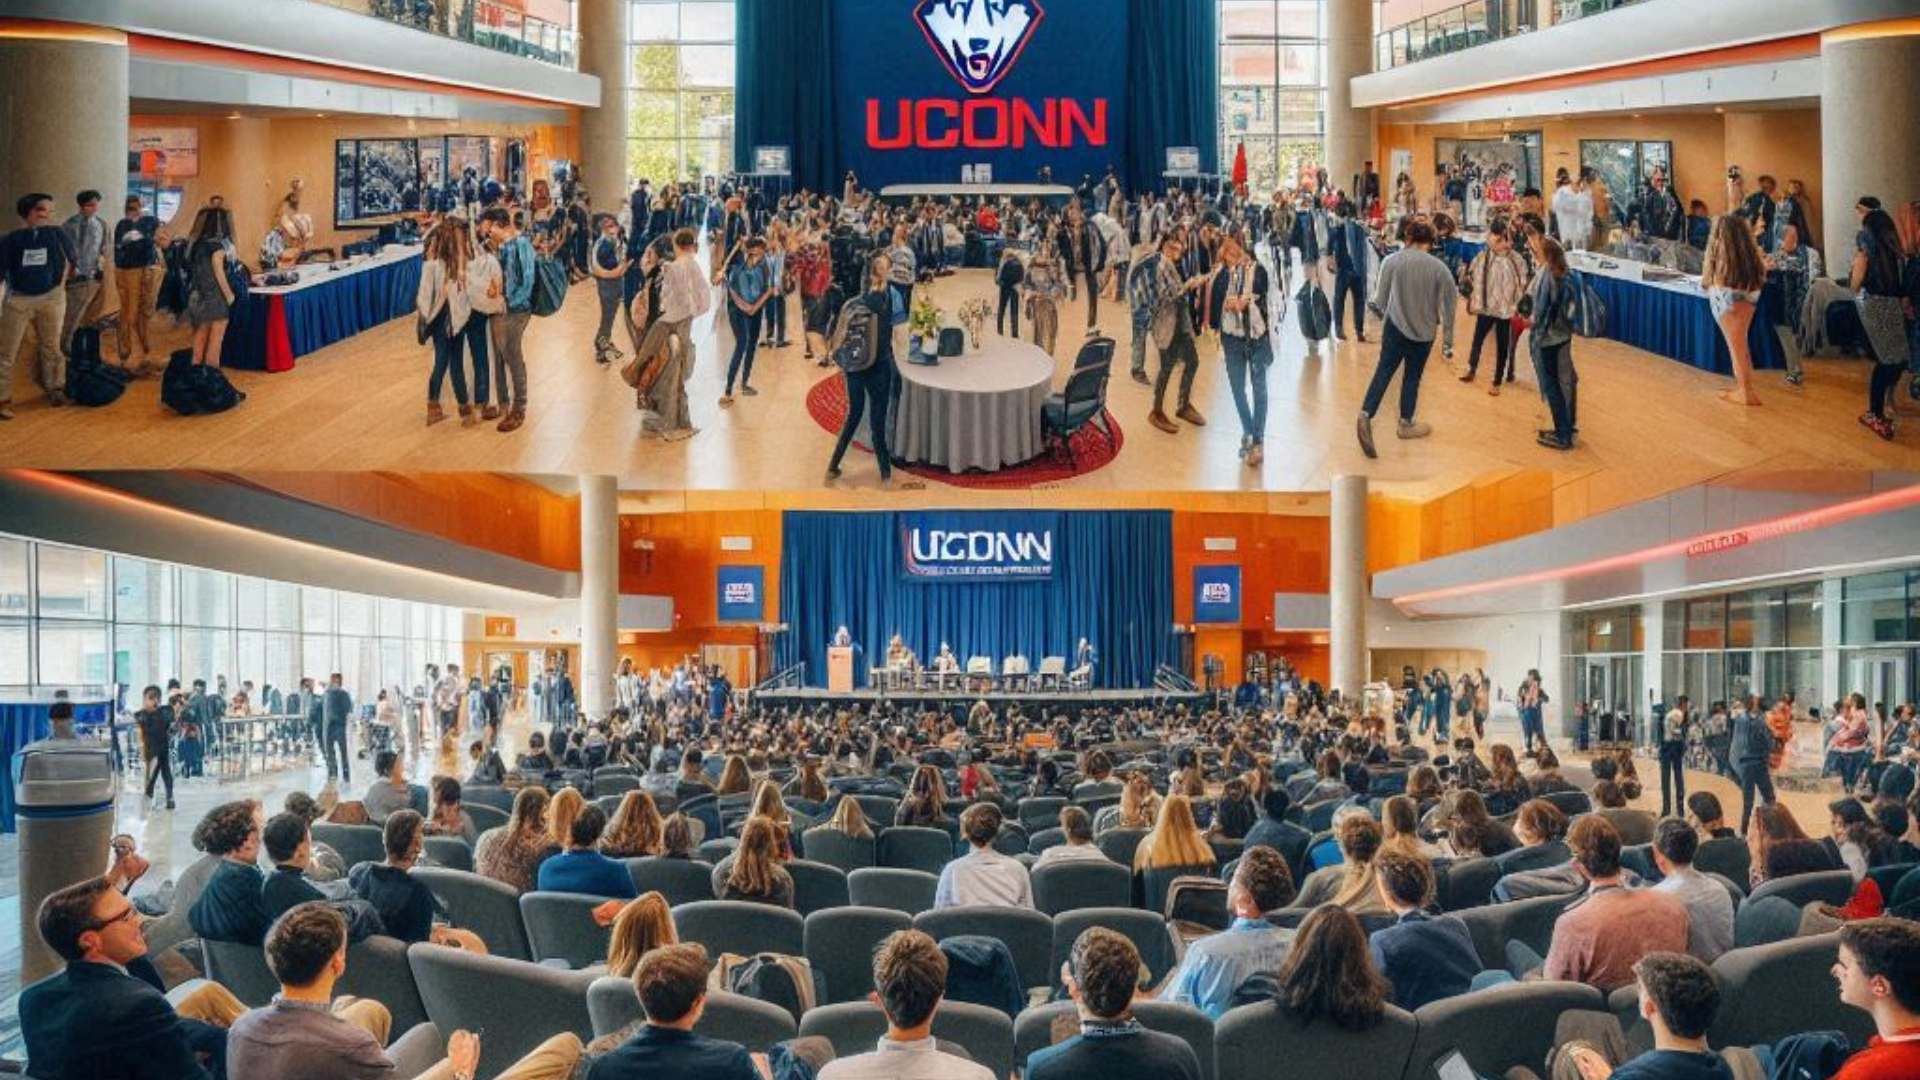 UConn's Sustainability Summit where graduate students share research, network with peers, and advance sustainability initiatives through interdisciplinary collaboration.